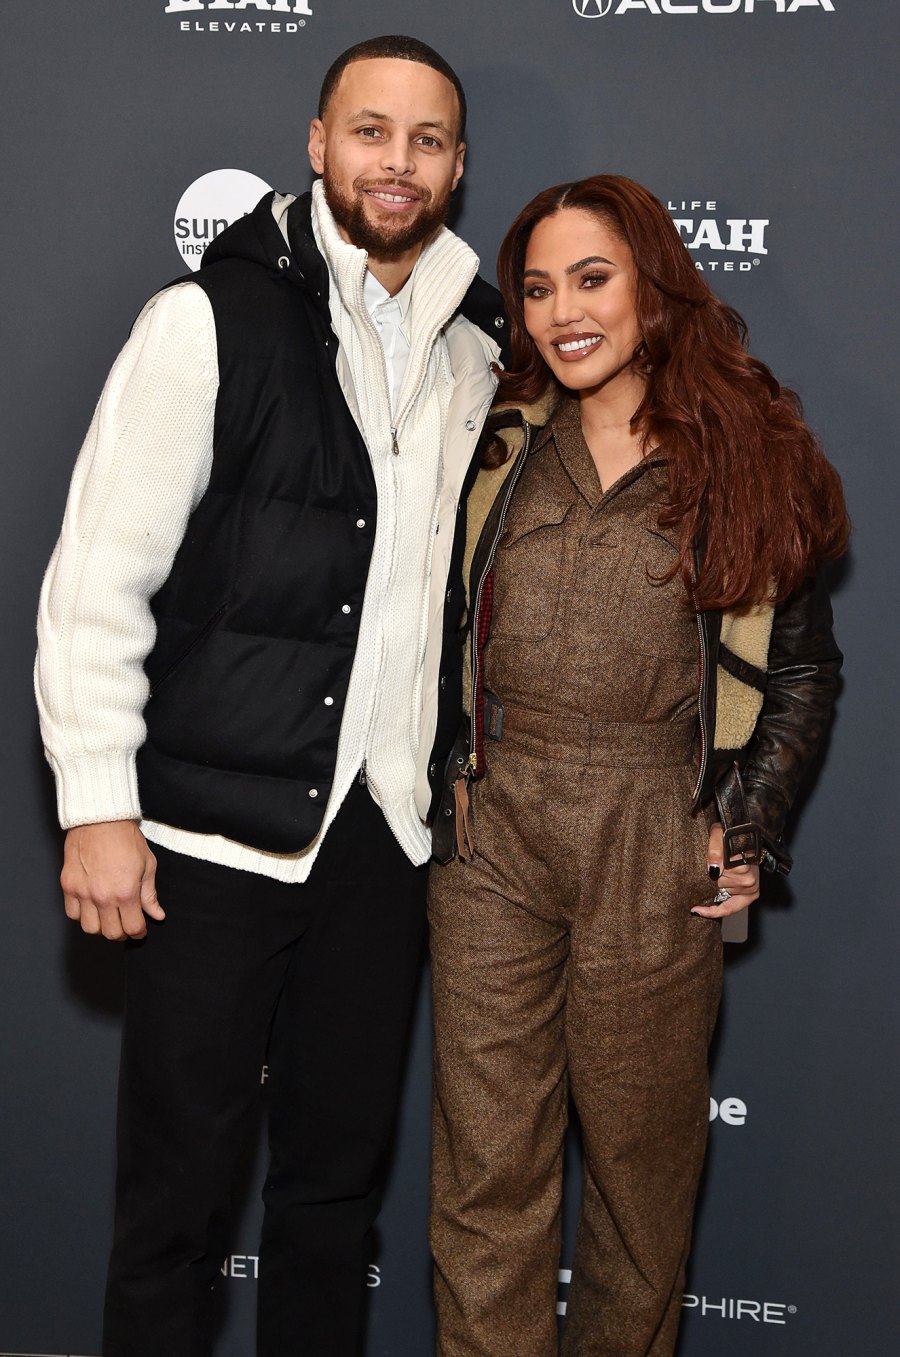 From Teenagers at Church to Hollywood Power Couple- A Timeline of Stephen and Ayesha Curry's Relationship - 534